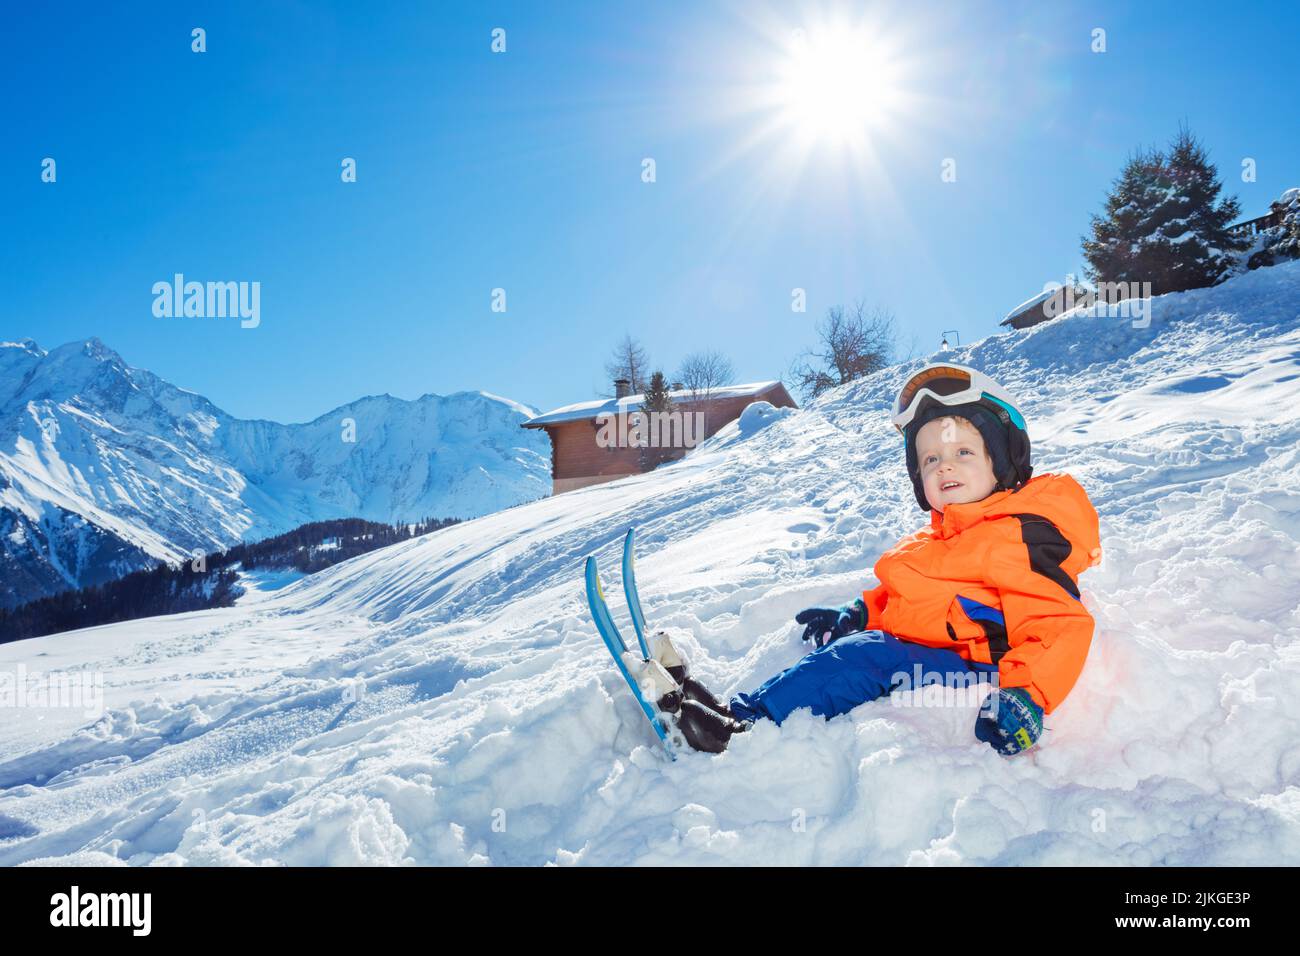 Boy with ski ready for skiing school sit in snow over mountain Stock Photo